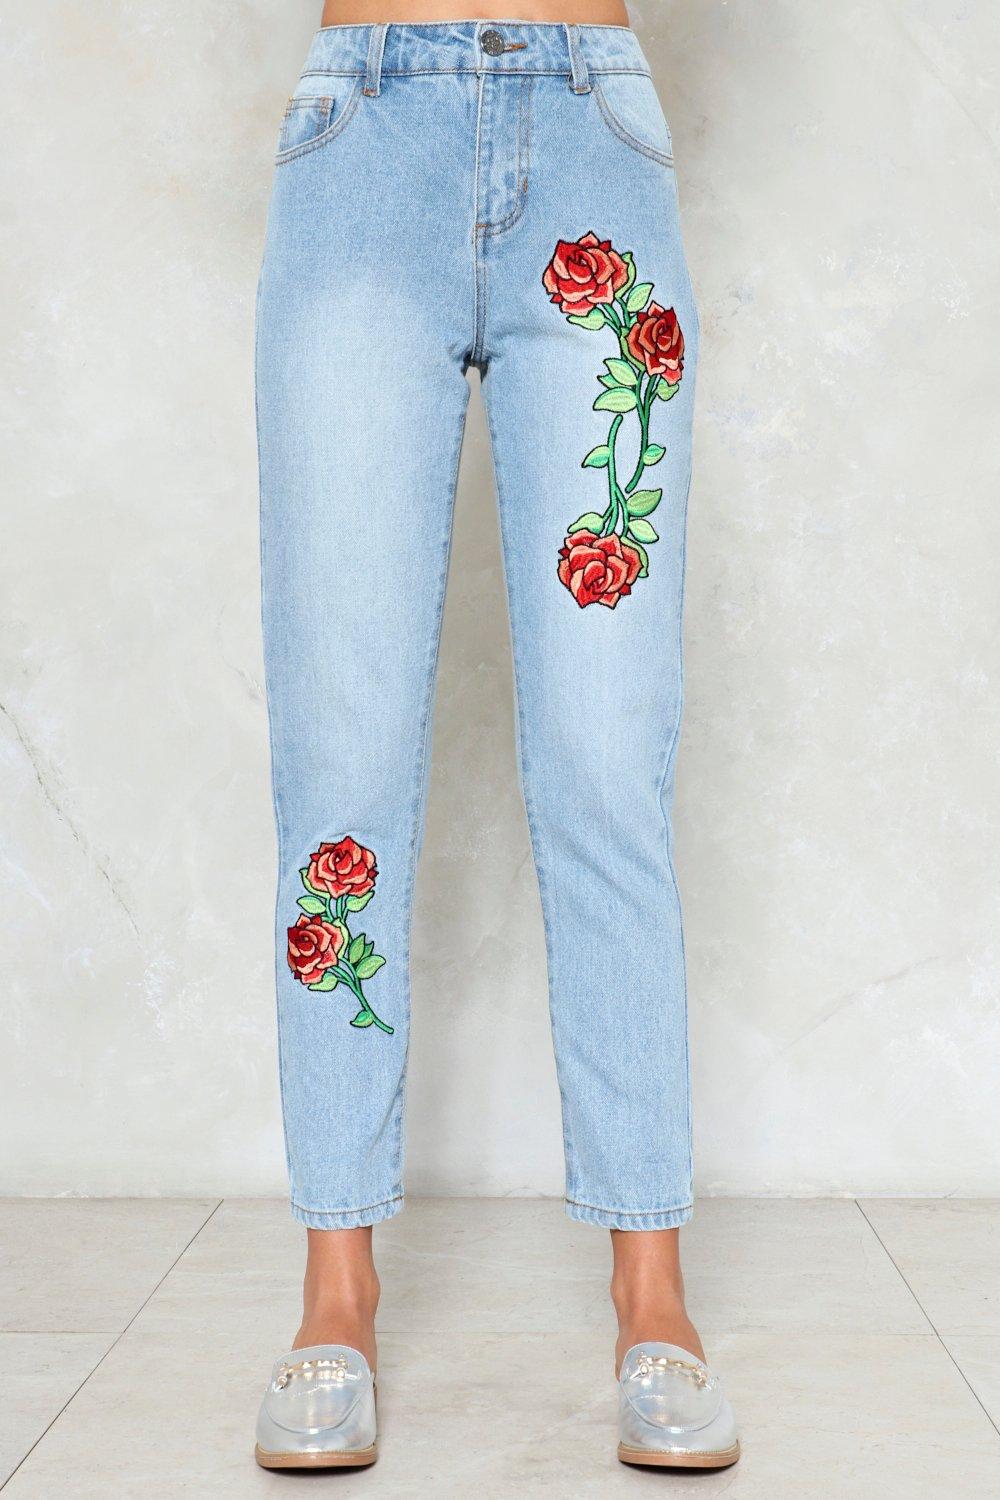 Life Rose On Embroidered Jeans | Nasty Gal